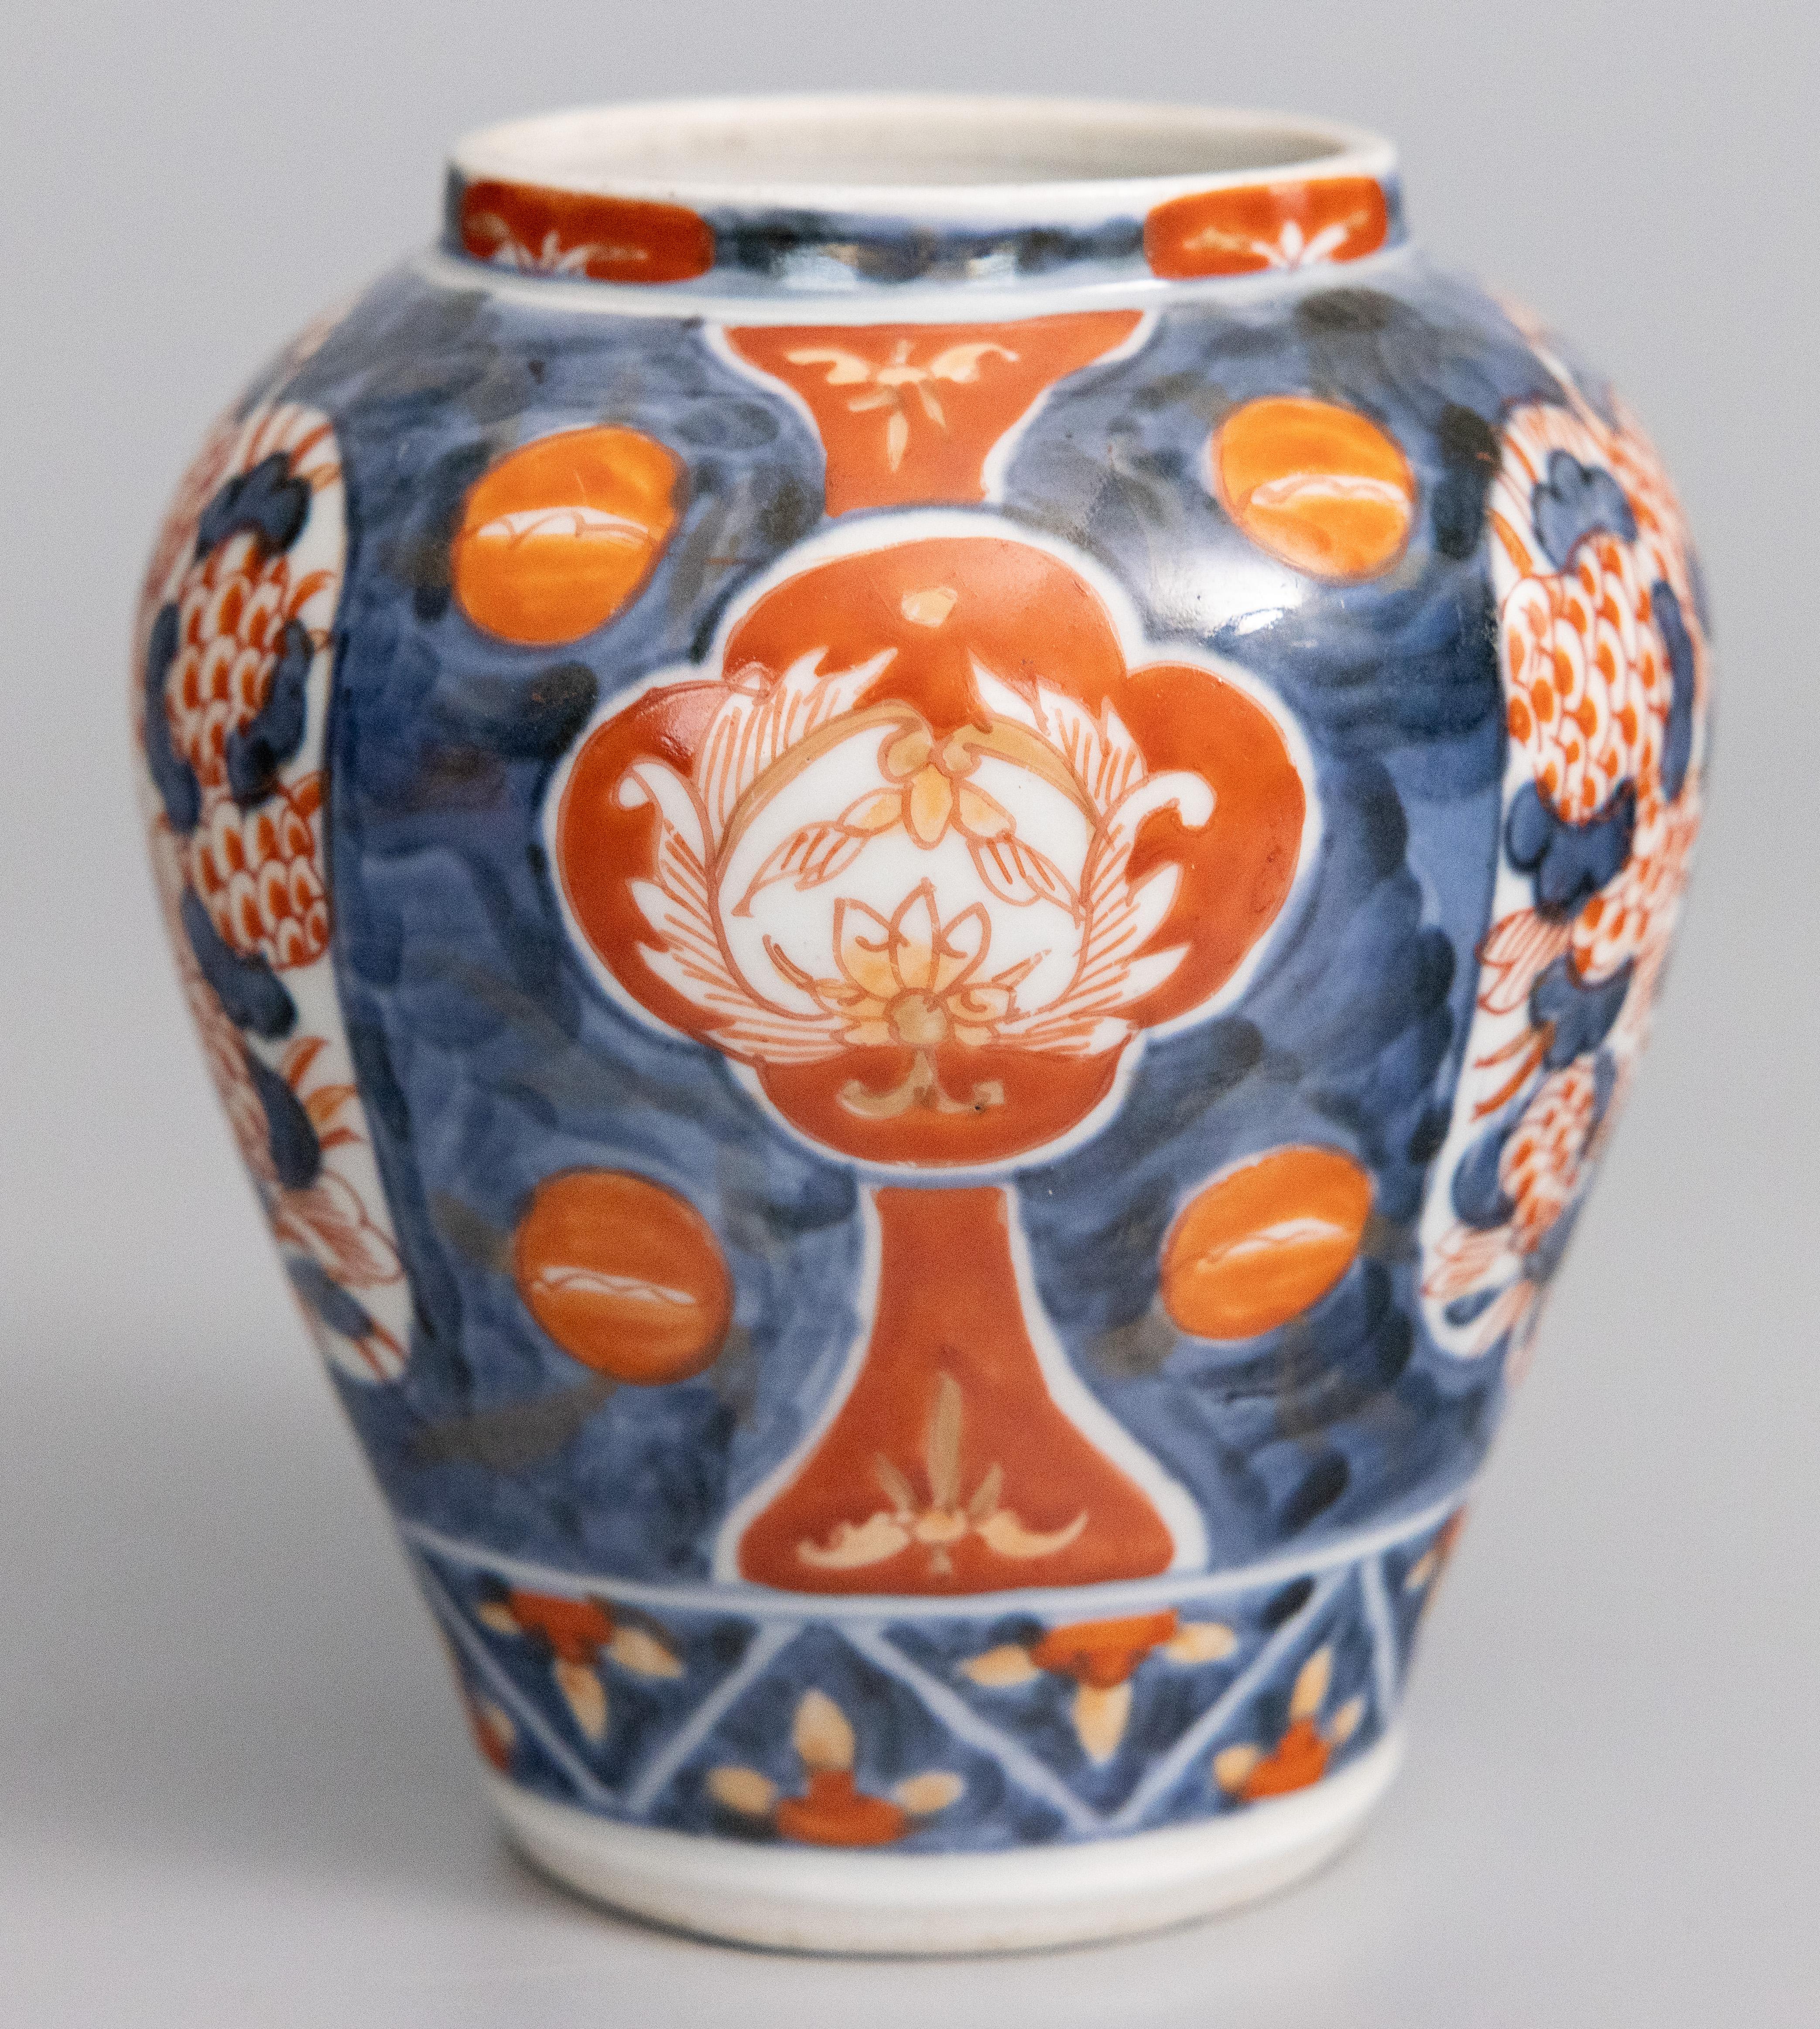 19th-Century Japanese Imari porcelain vase/brush pot. This fine vase have a lovely shape and hand painted floral designs in the traditional Imari colors.